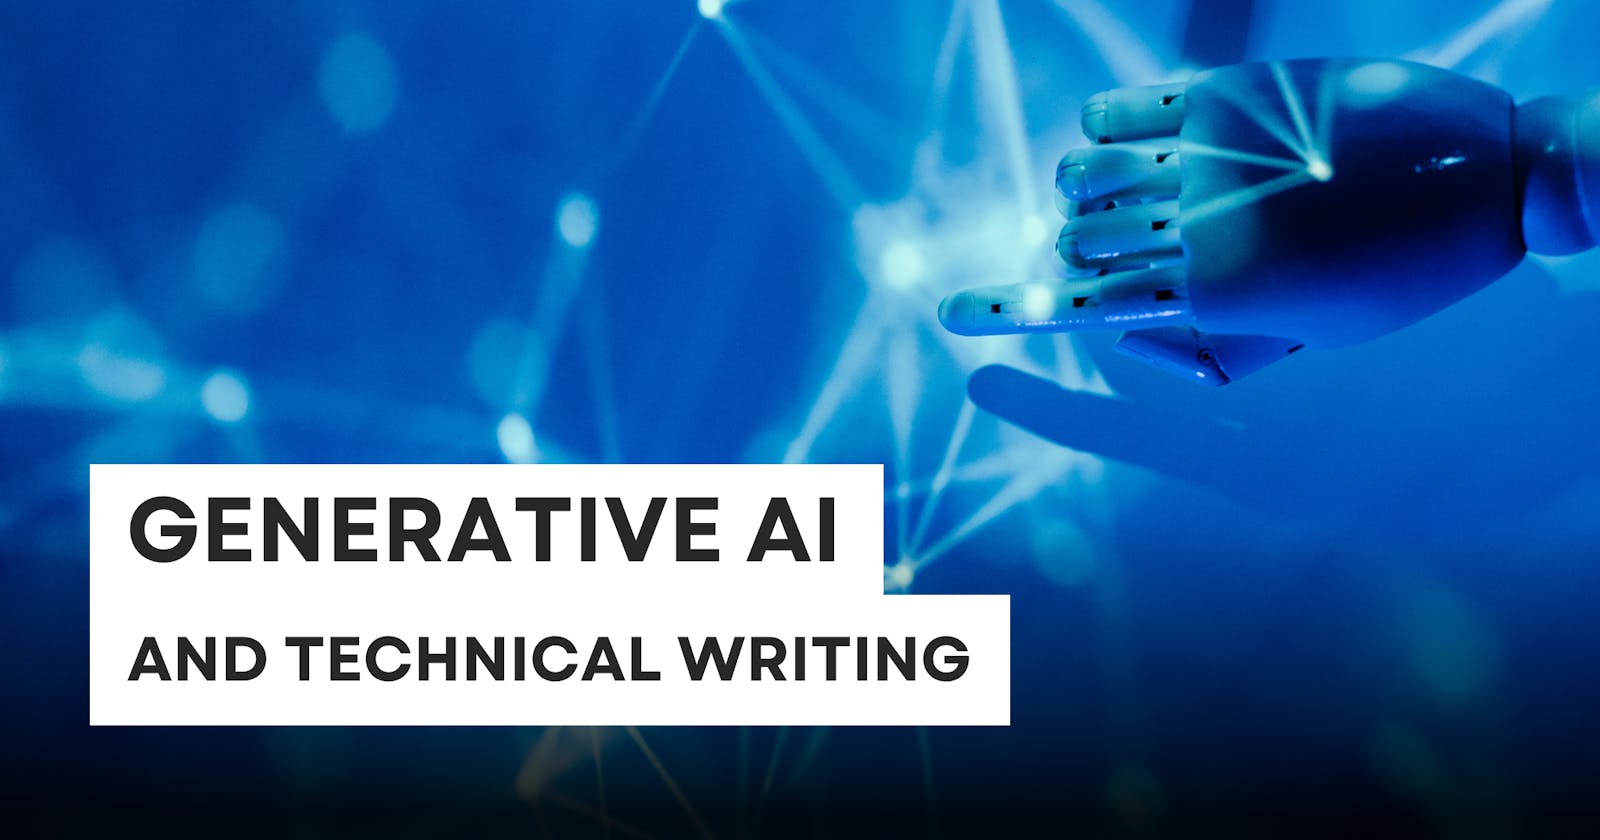 How can we safely utilize AI in technical writing?